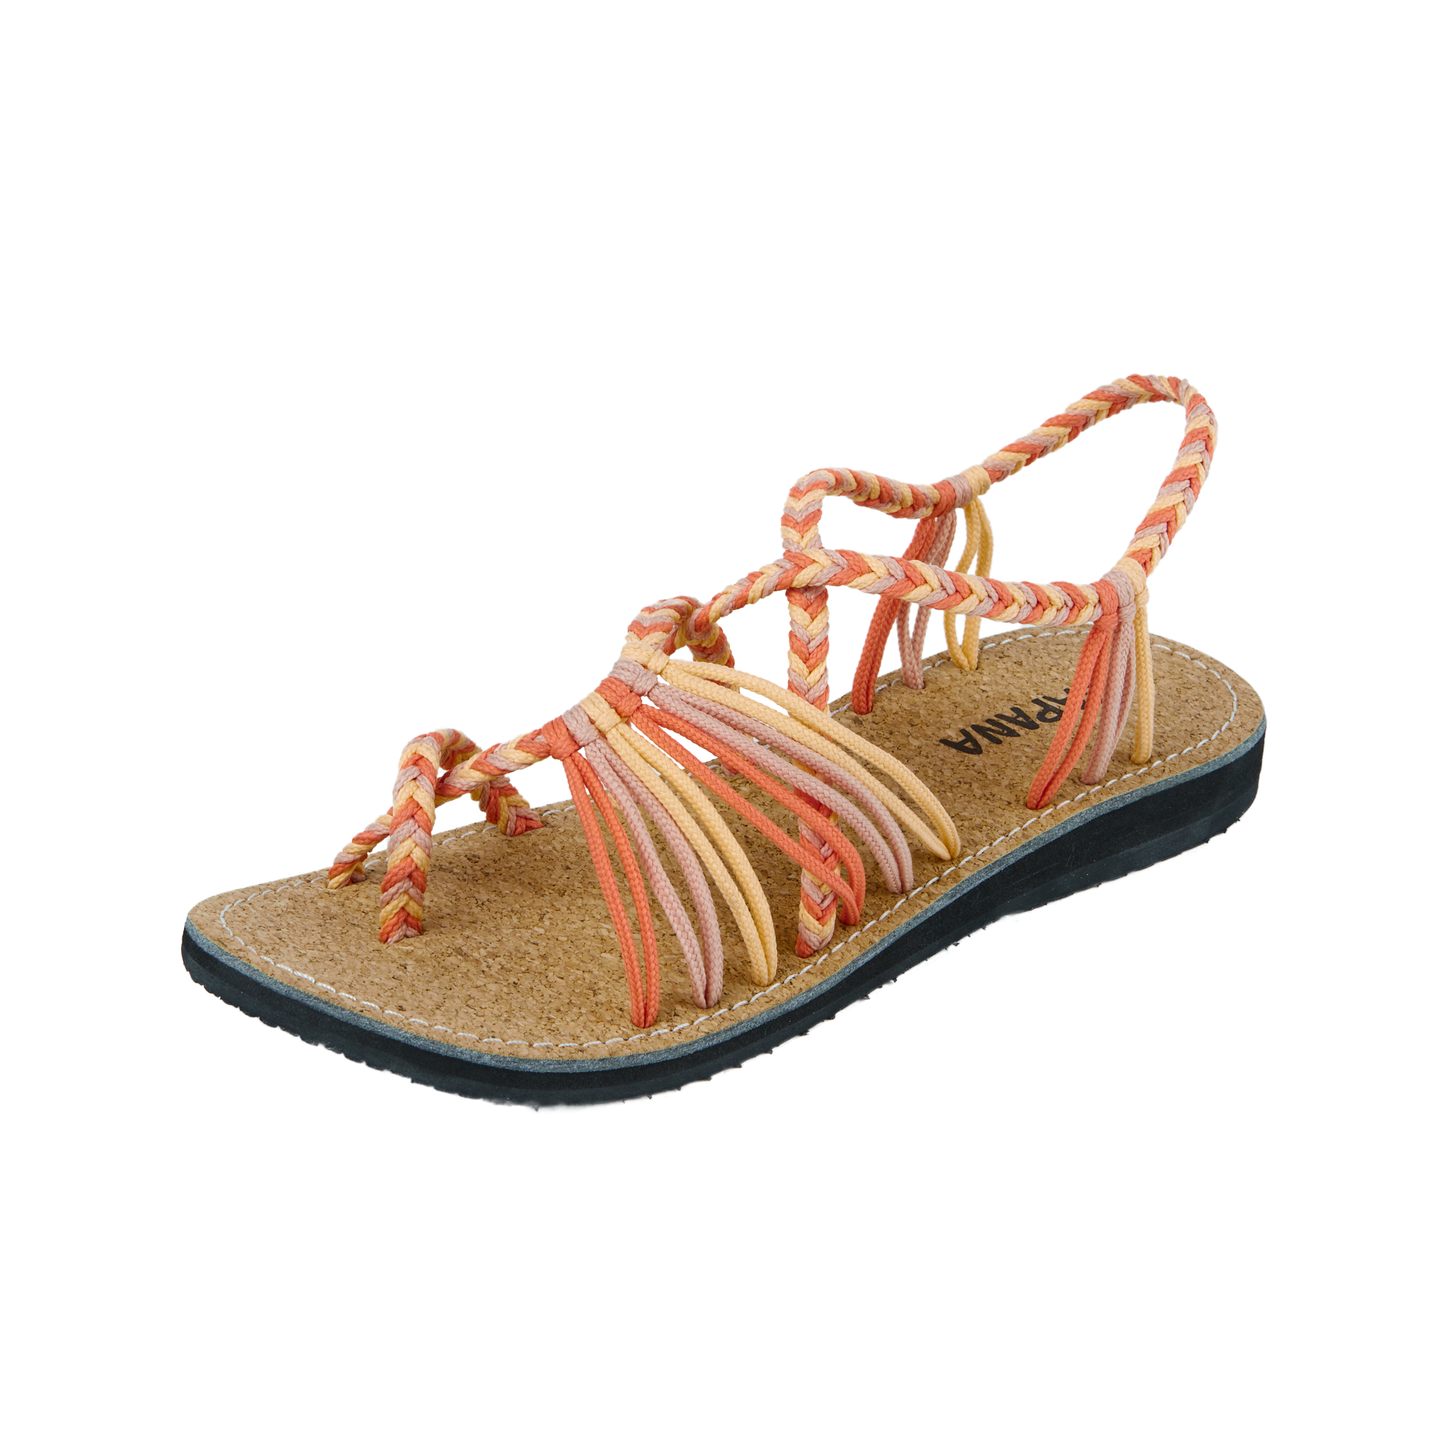 Hand woven sandals Sunset hour Rope Sandals on the side  in white background